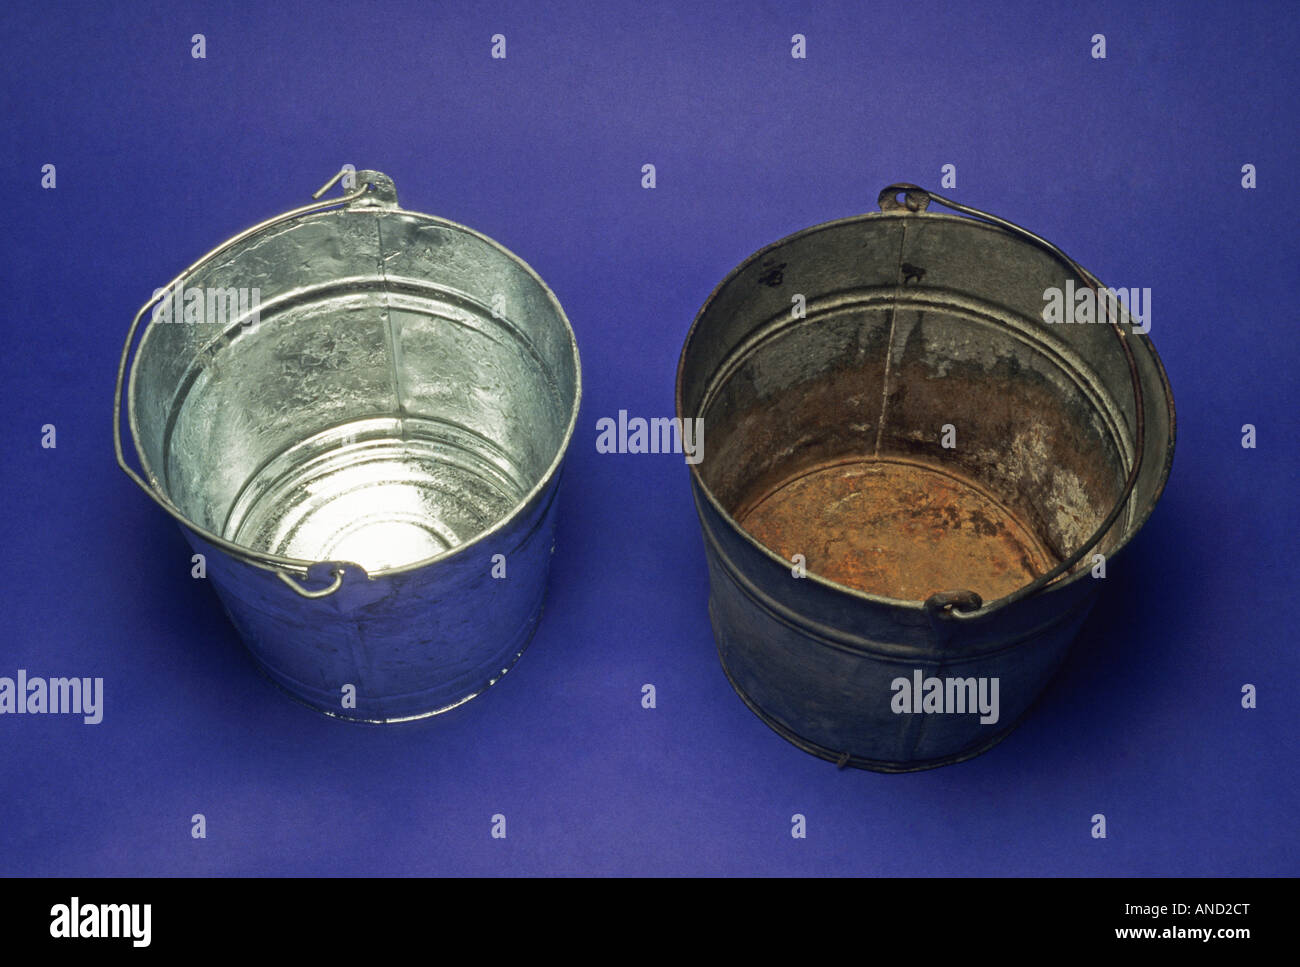 Chemical reactions galvanized steel bucket shows no rust non galvanized steel showing rust science chemistry physics reactions Stock Photo